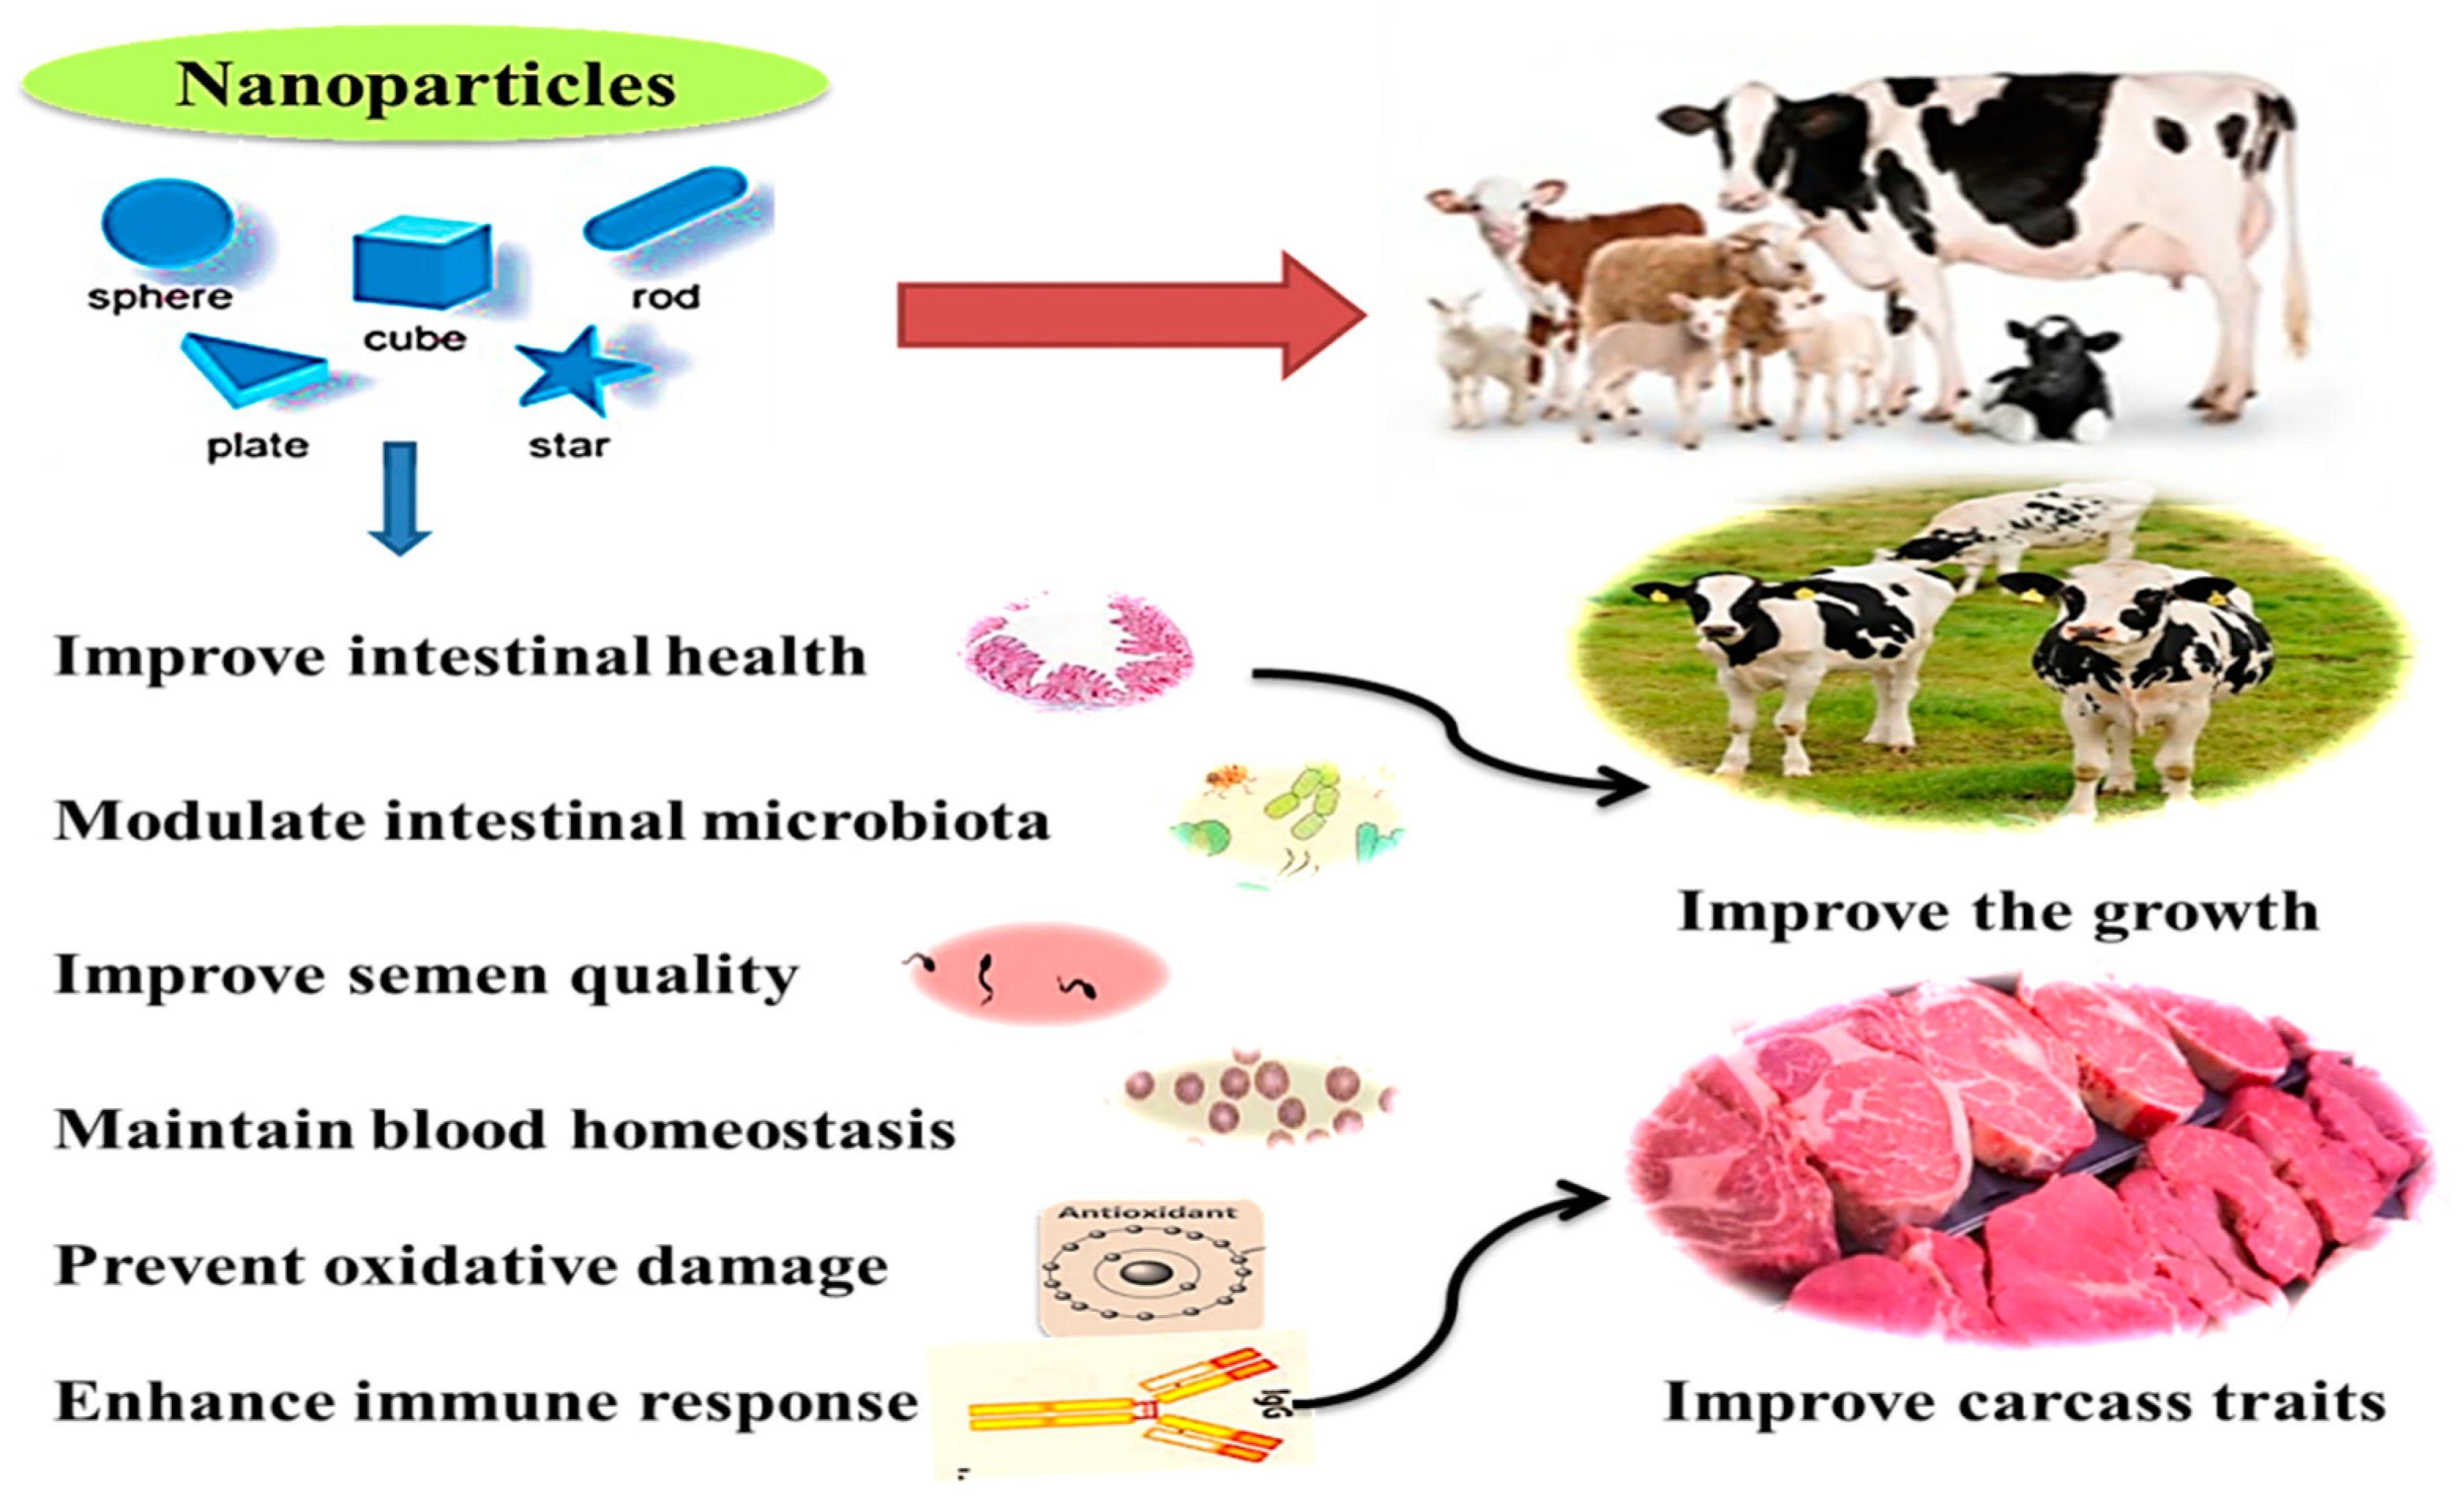 Animals | Free Full-Text | Nanominerals: Fabrication Methods, Benefits and  Hazards, and Their Applications in Ruminants with Special Reference to  Selenium and Zinc Nanoparticles